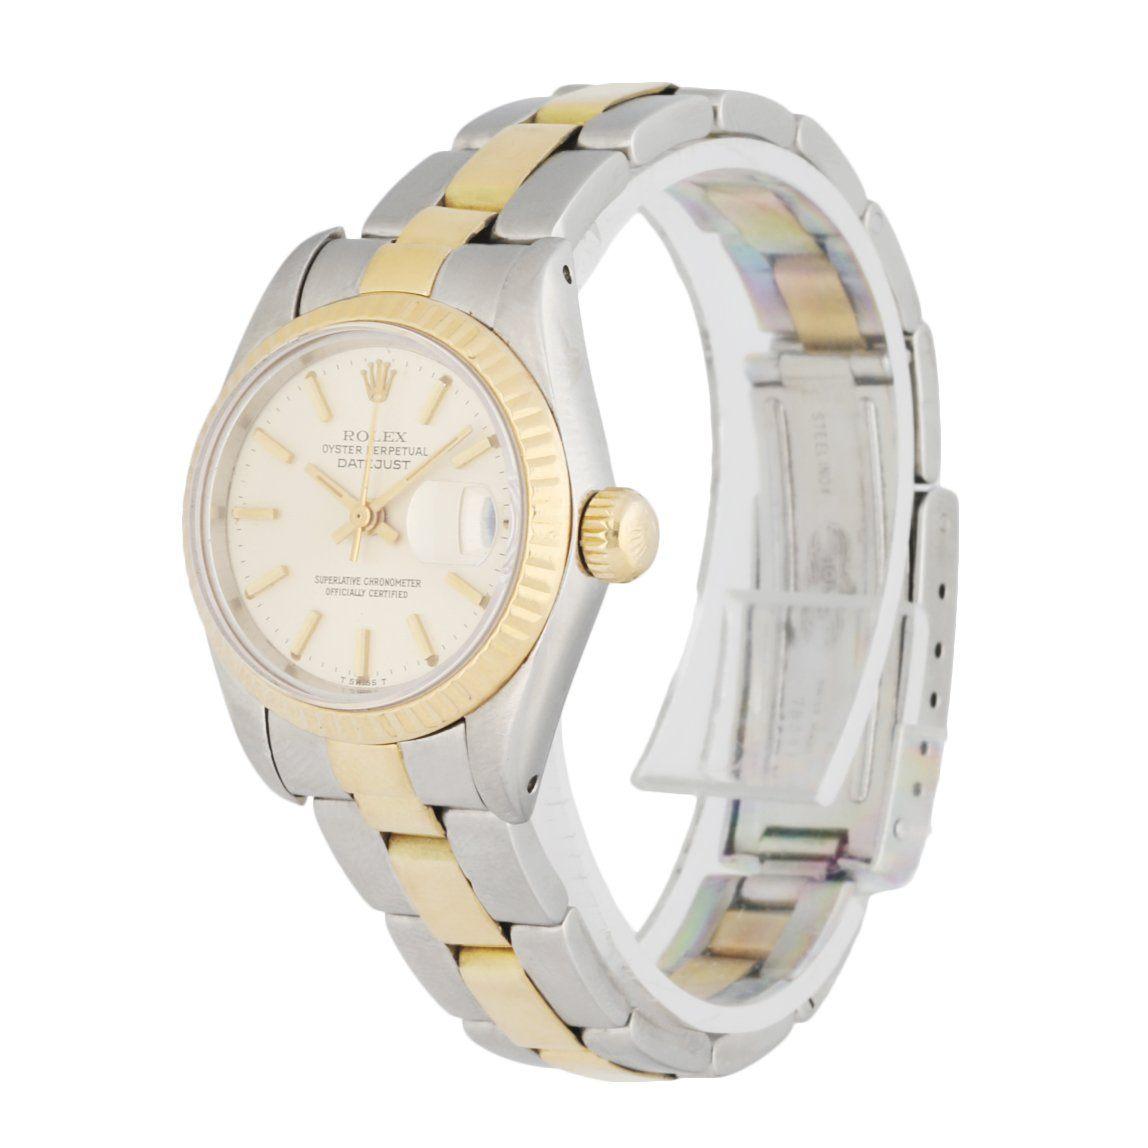 Rolex Datejust 69173 Ladies Watch. 26mm Stainless Steel case. 18K Yellow GoldÂ fluted bezel. Off-WhiteÂ dial with Luminous gold hands and index hour markers. Minute markers on the outer dial. Date display at the 3 o'clock position. Stainless steel &